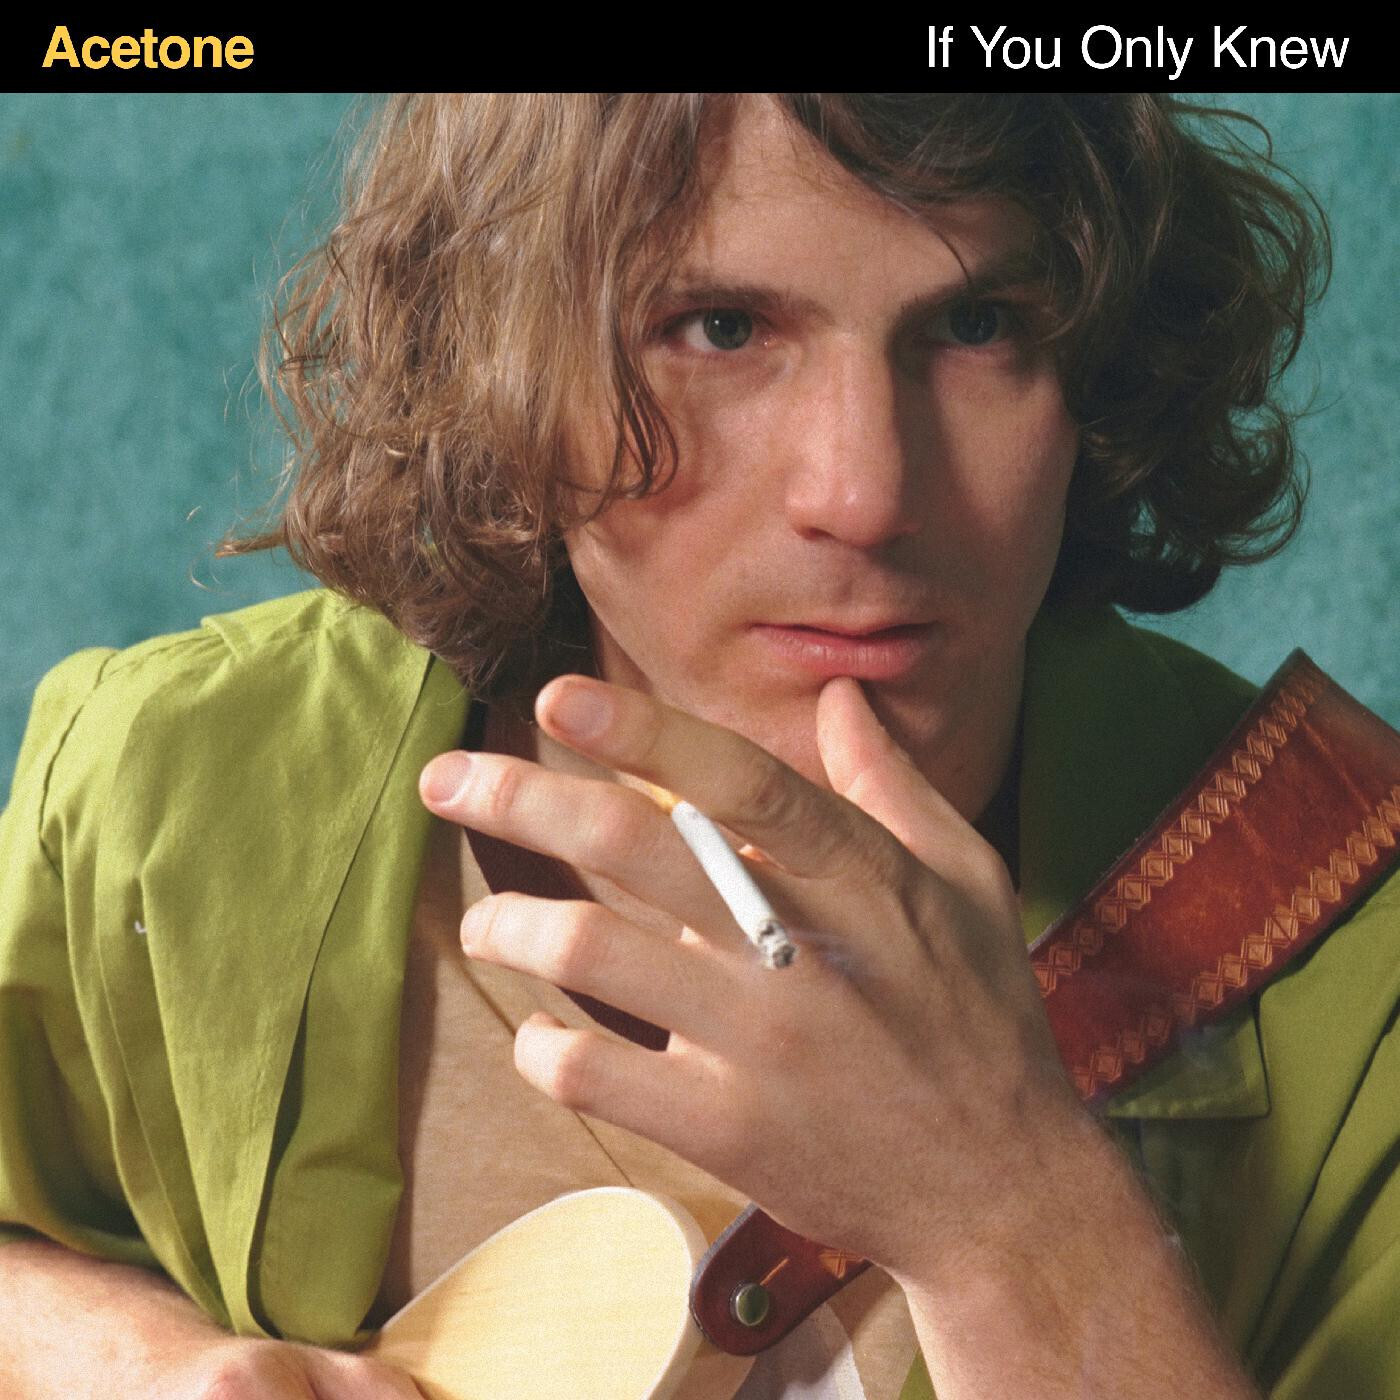 Acetone "If You Only Knew"